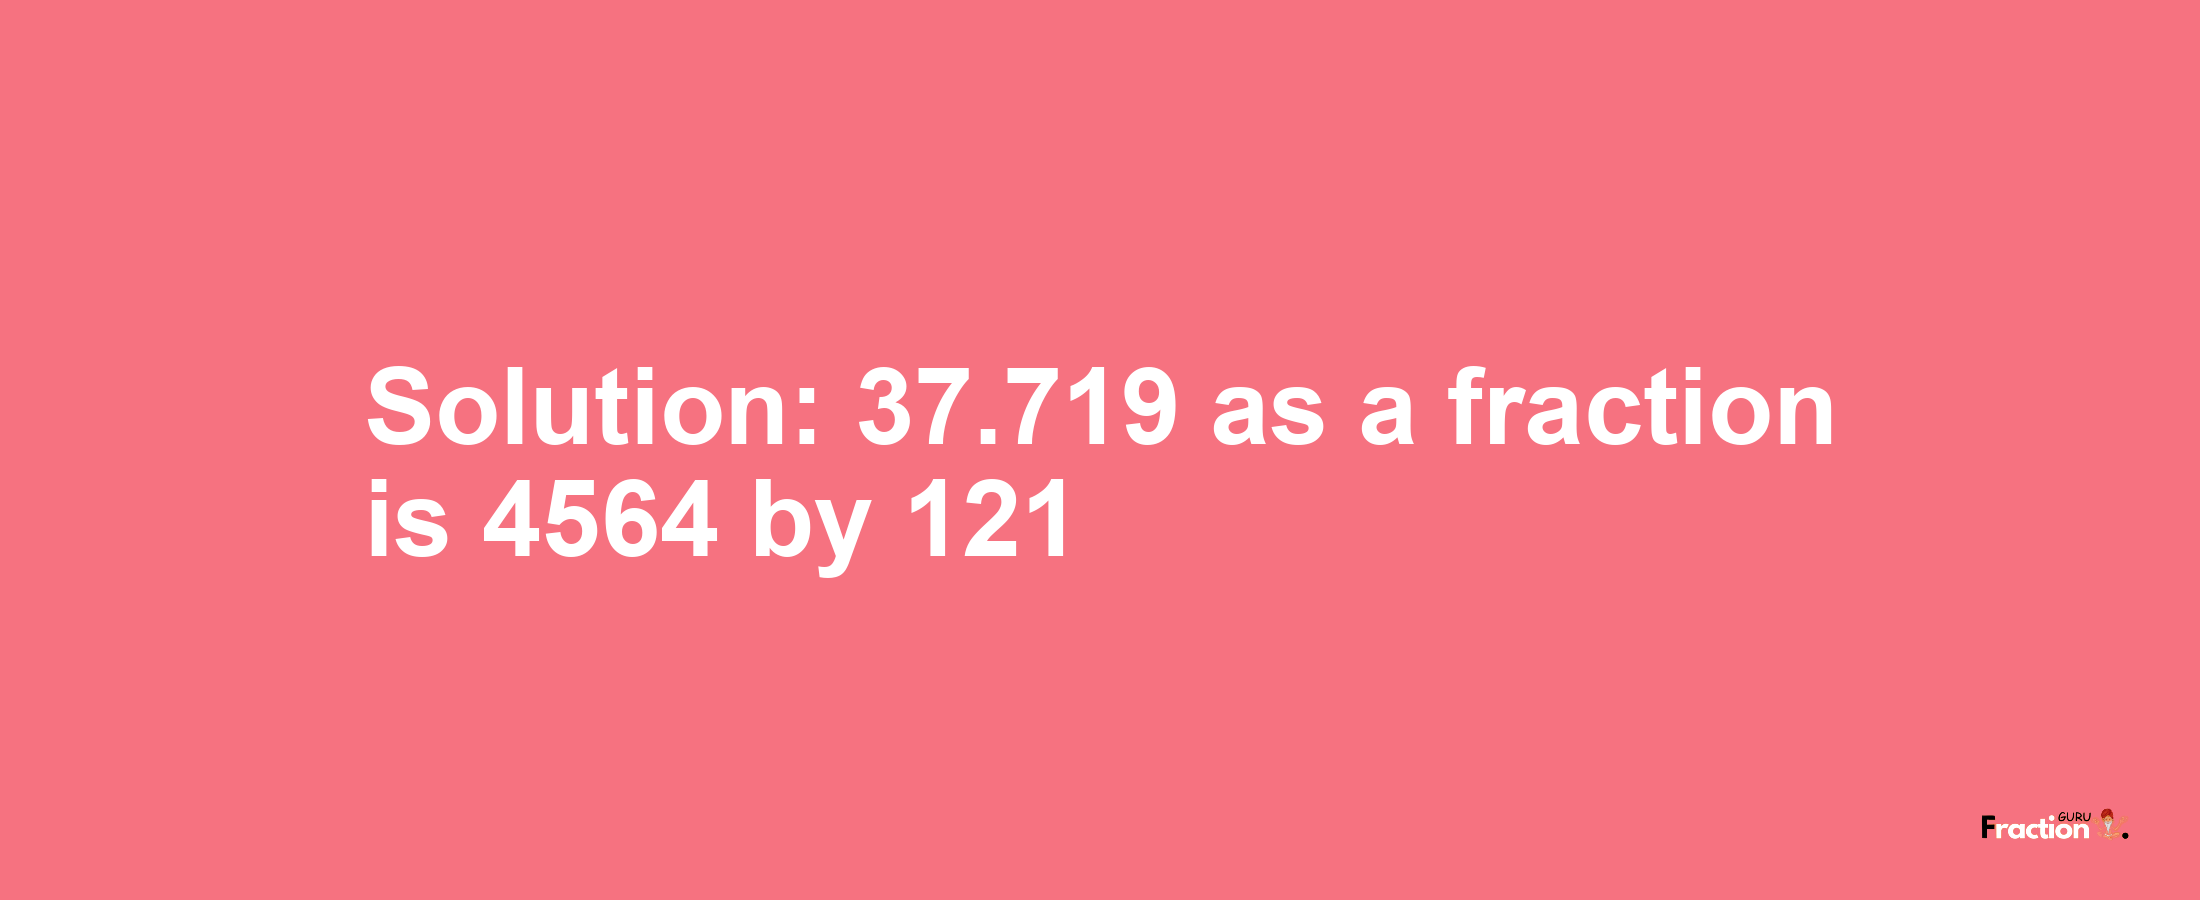 Solution:37.719 as a fraction is 4564/121